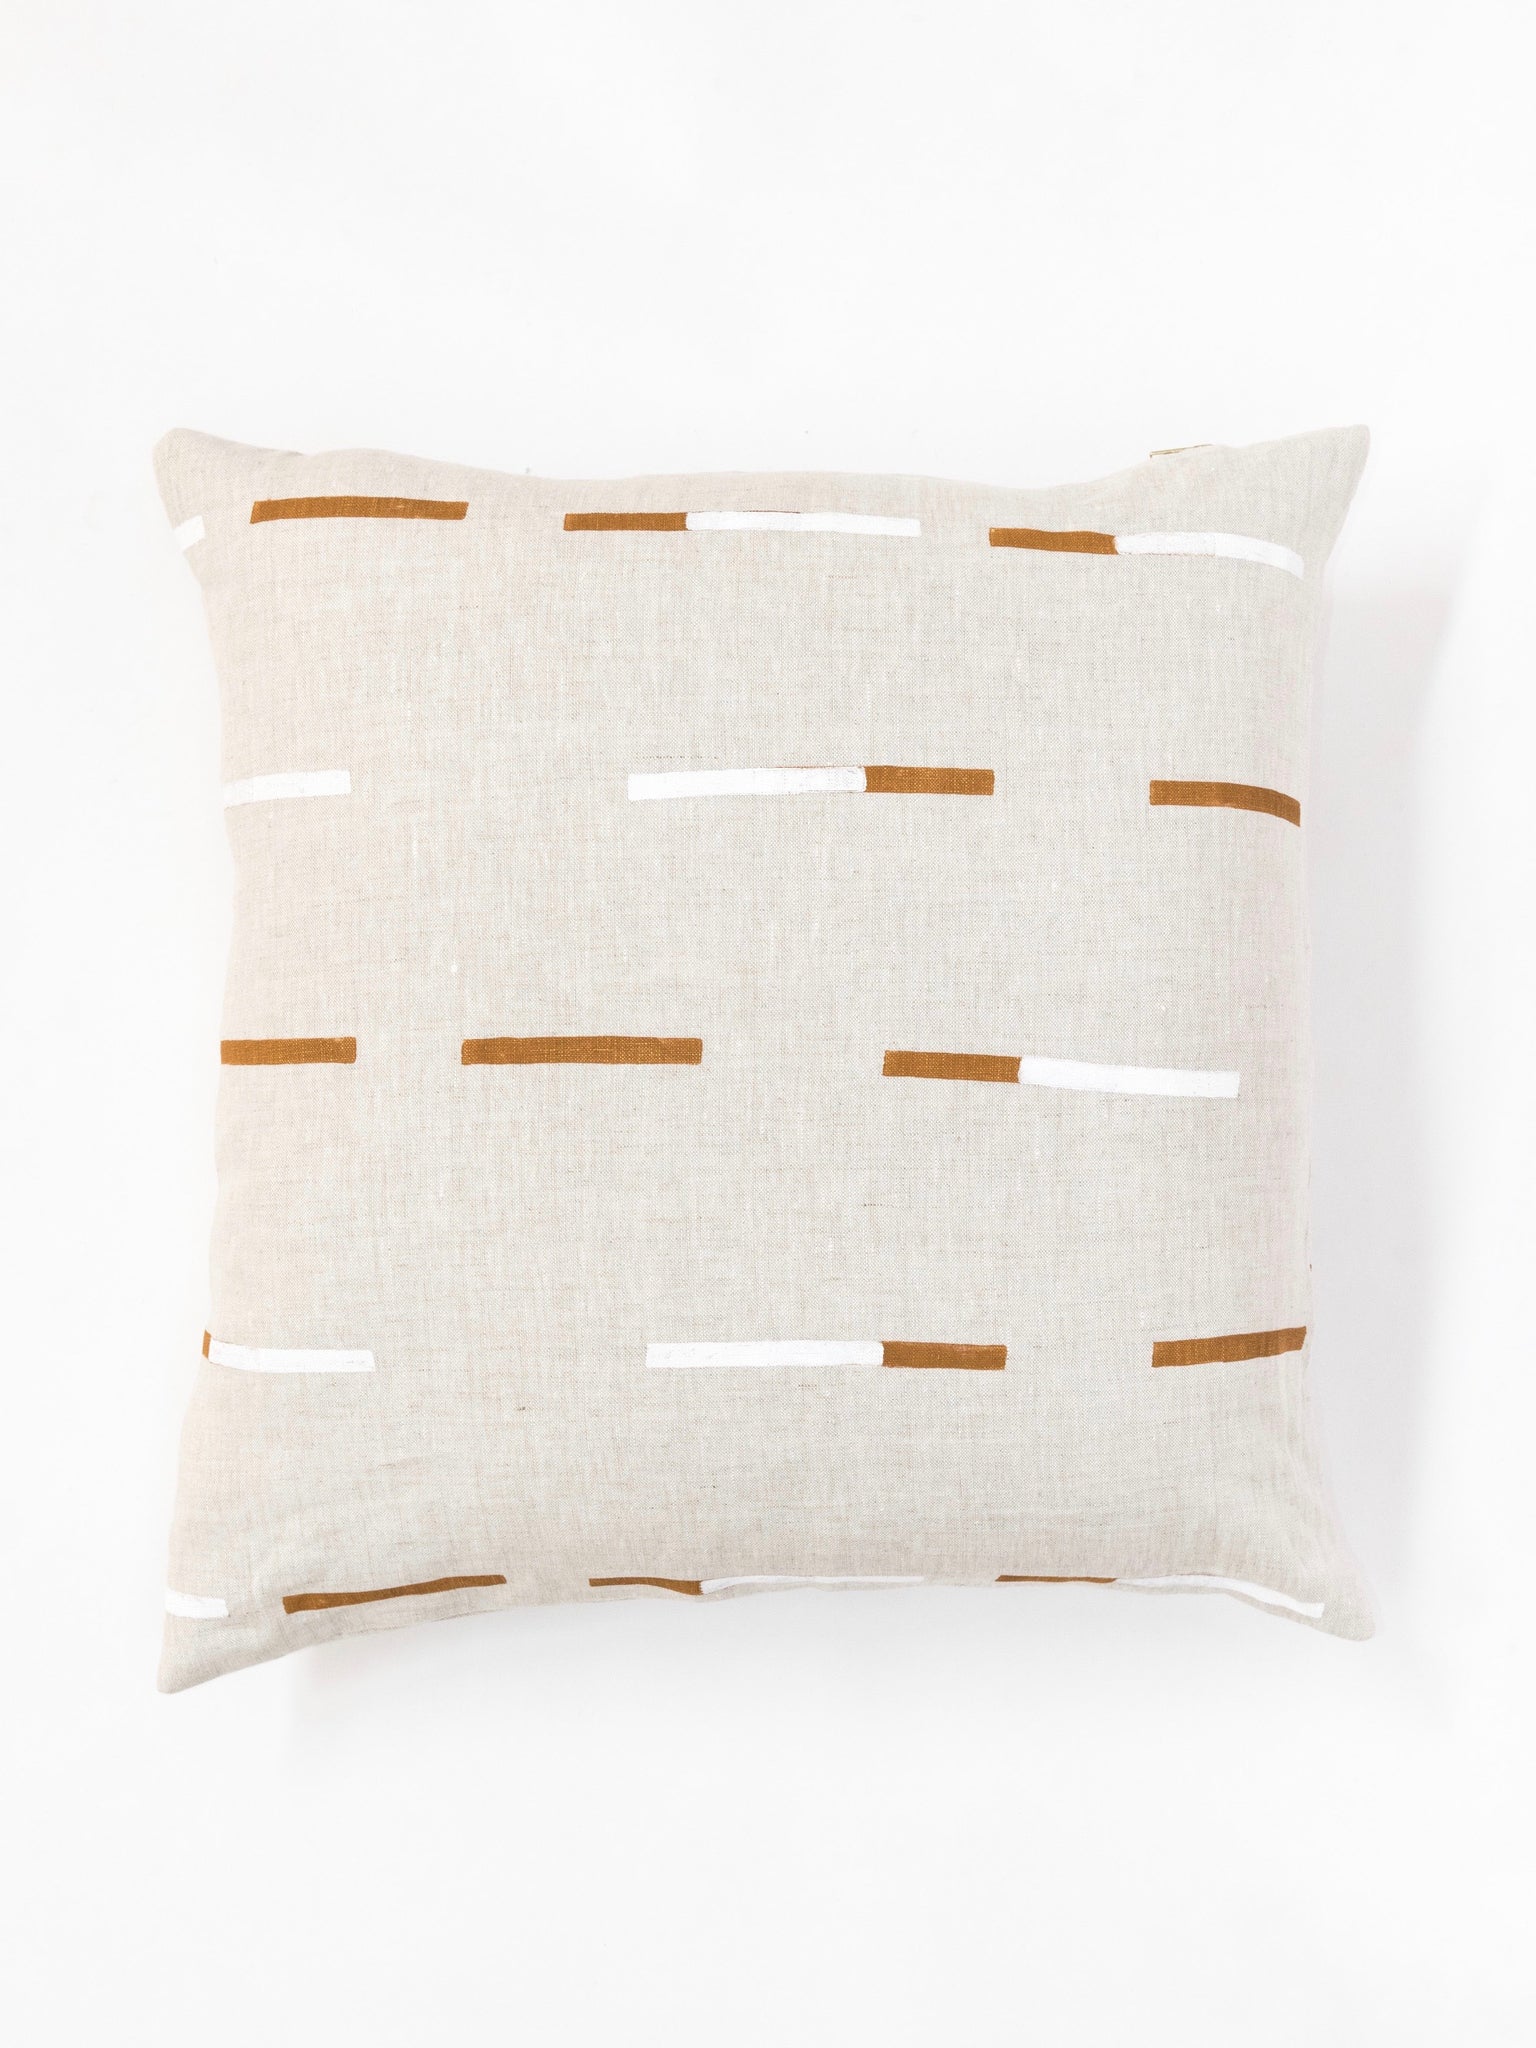 OVERLAPPING DASHES PILLOW